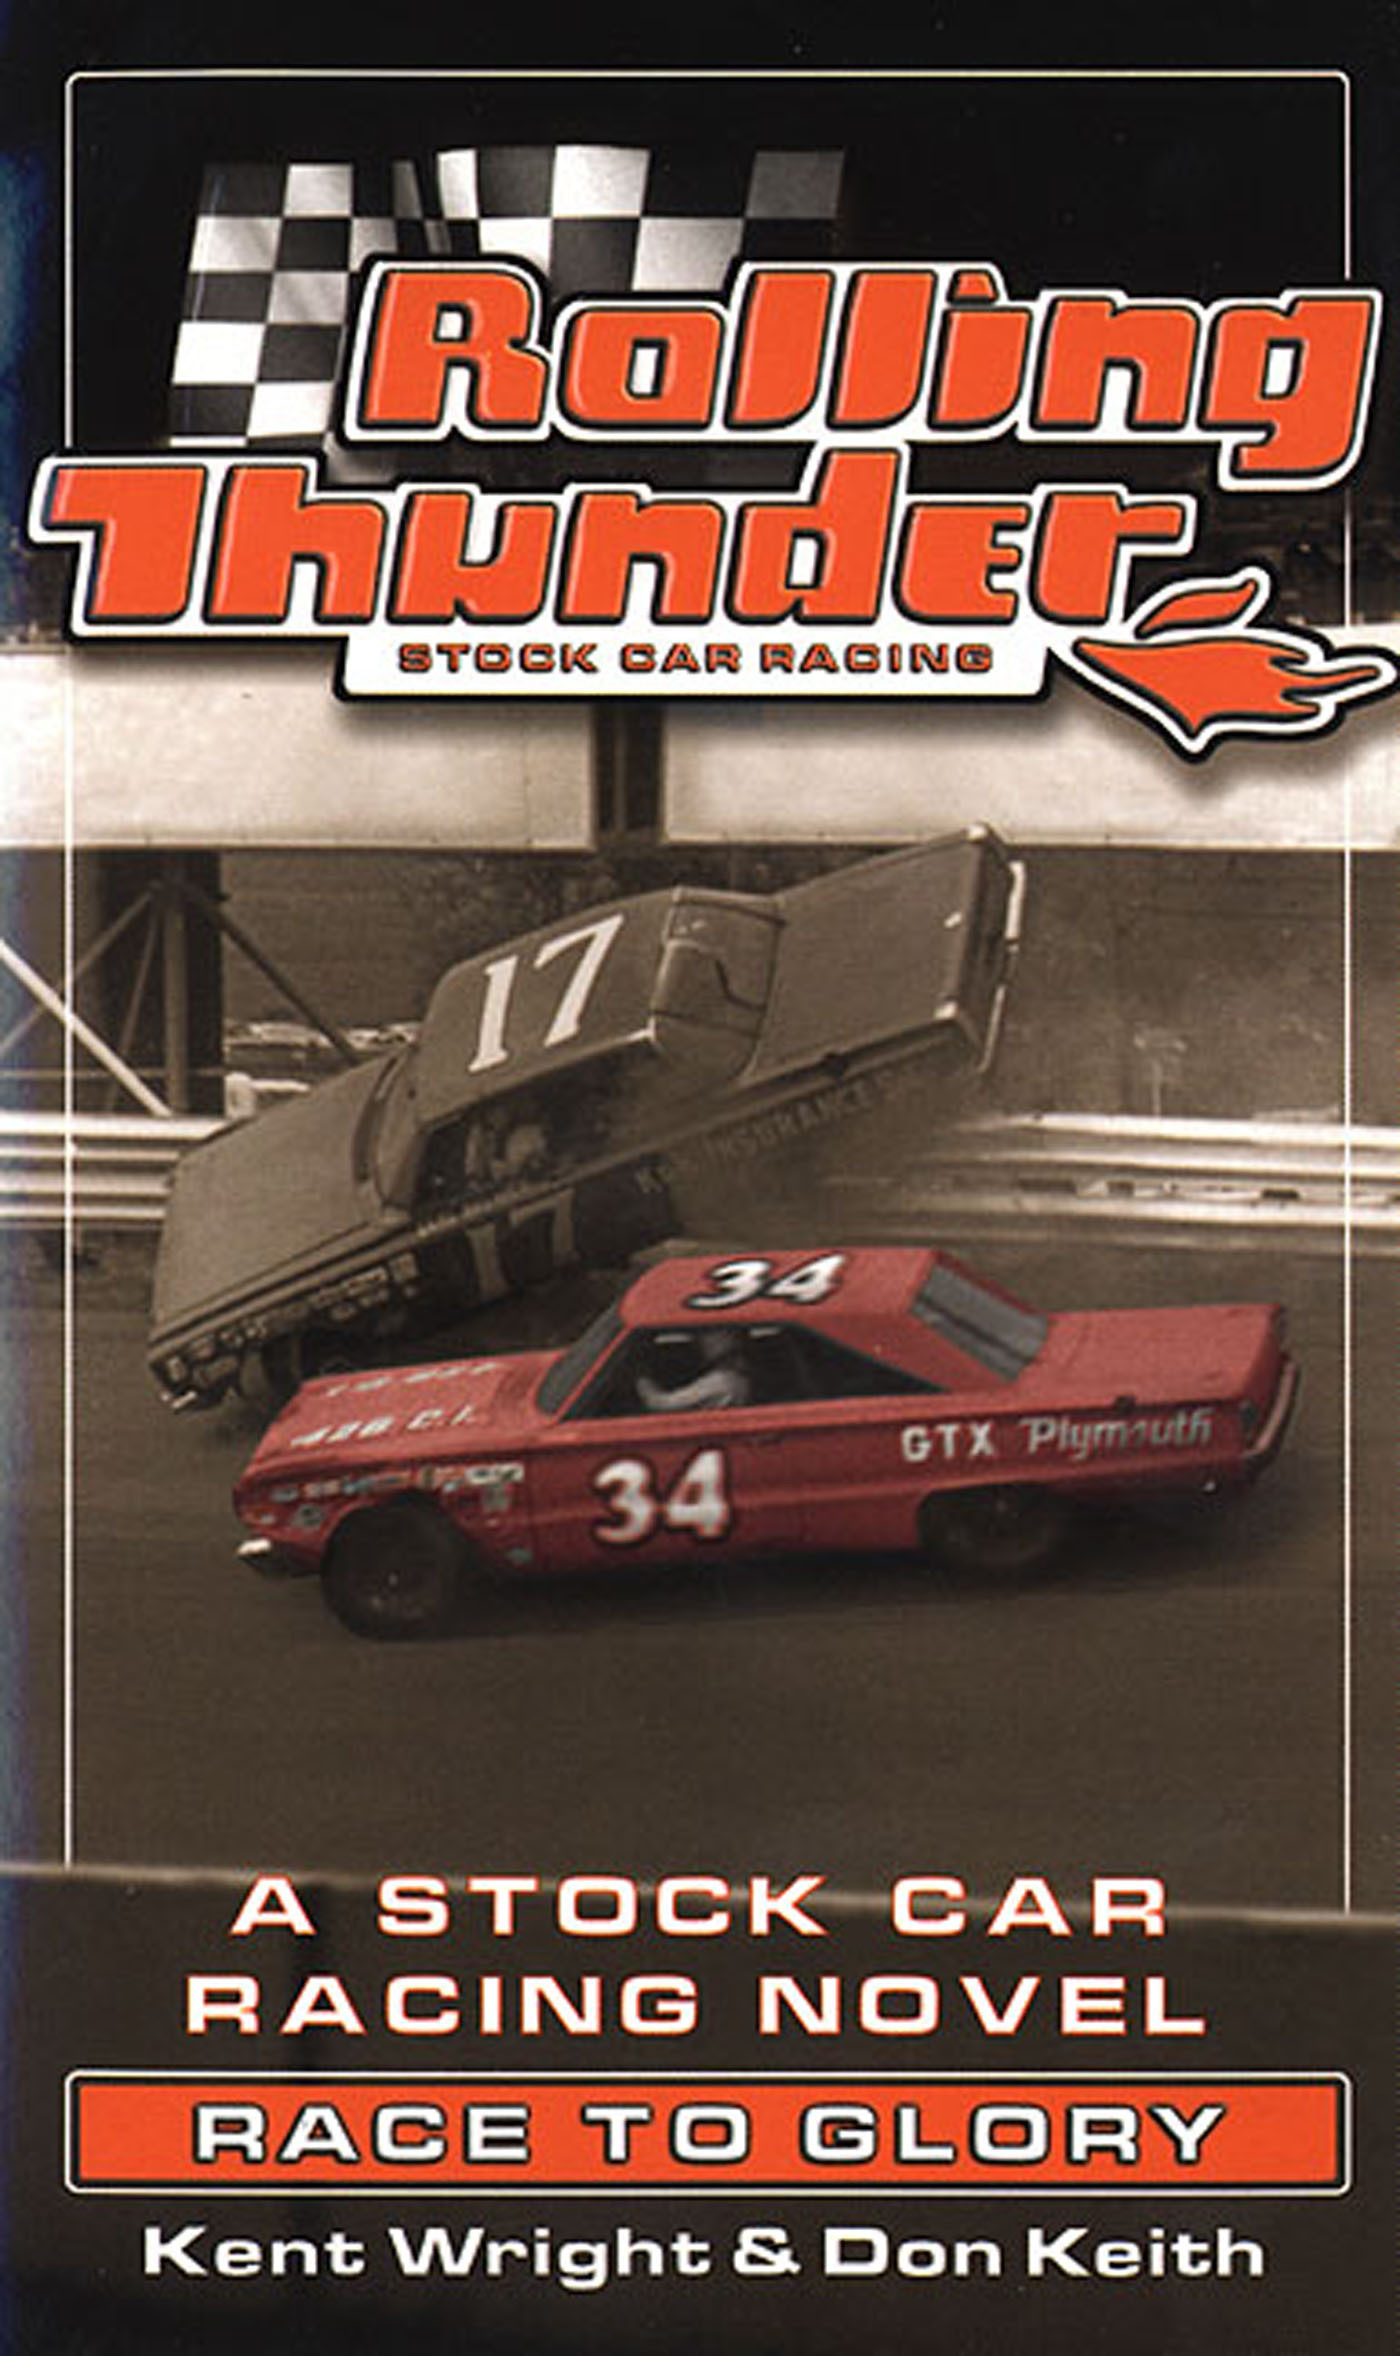 Rolling Thunder Stock Car Racing: Race To Glory : A Stock Car Racing Novel by Kent Wright, Don Keith